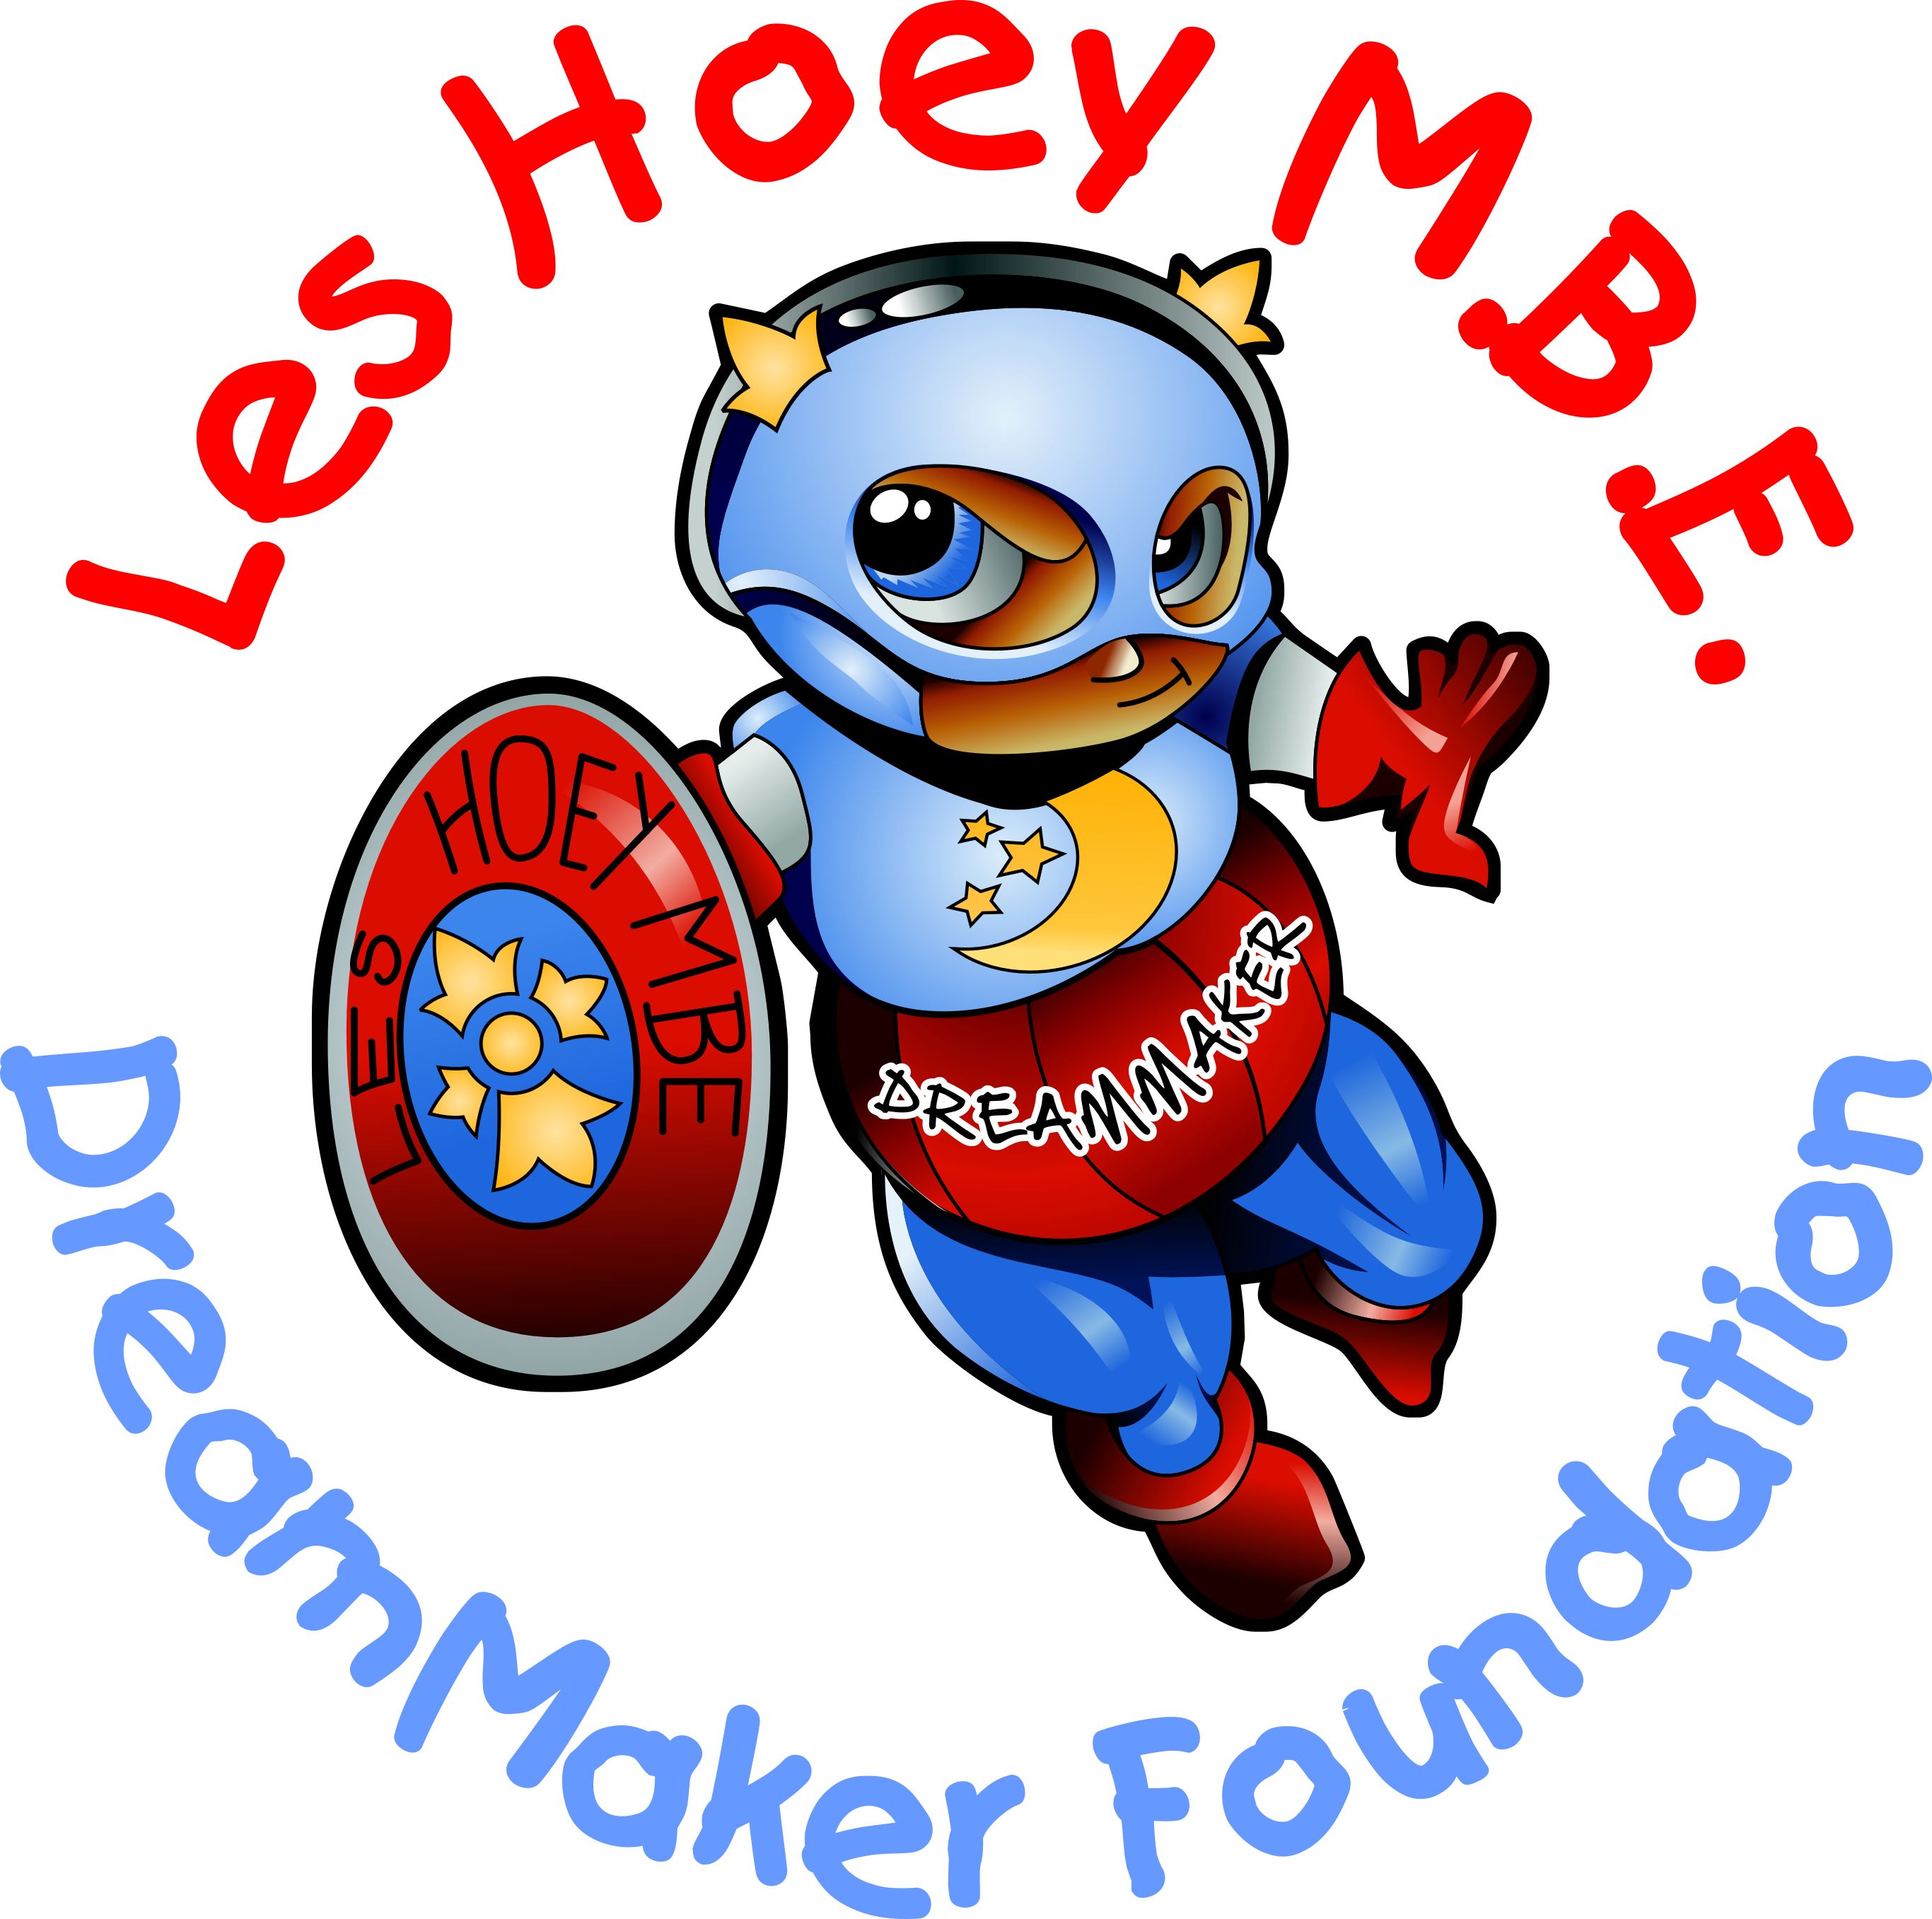 Les Hoey MBE DreamMaker Foundation